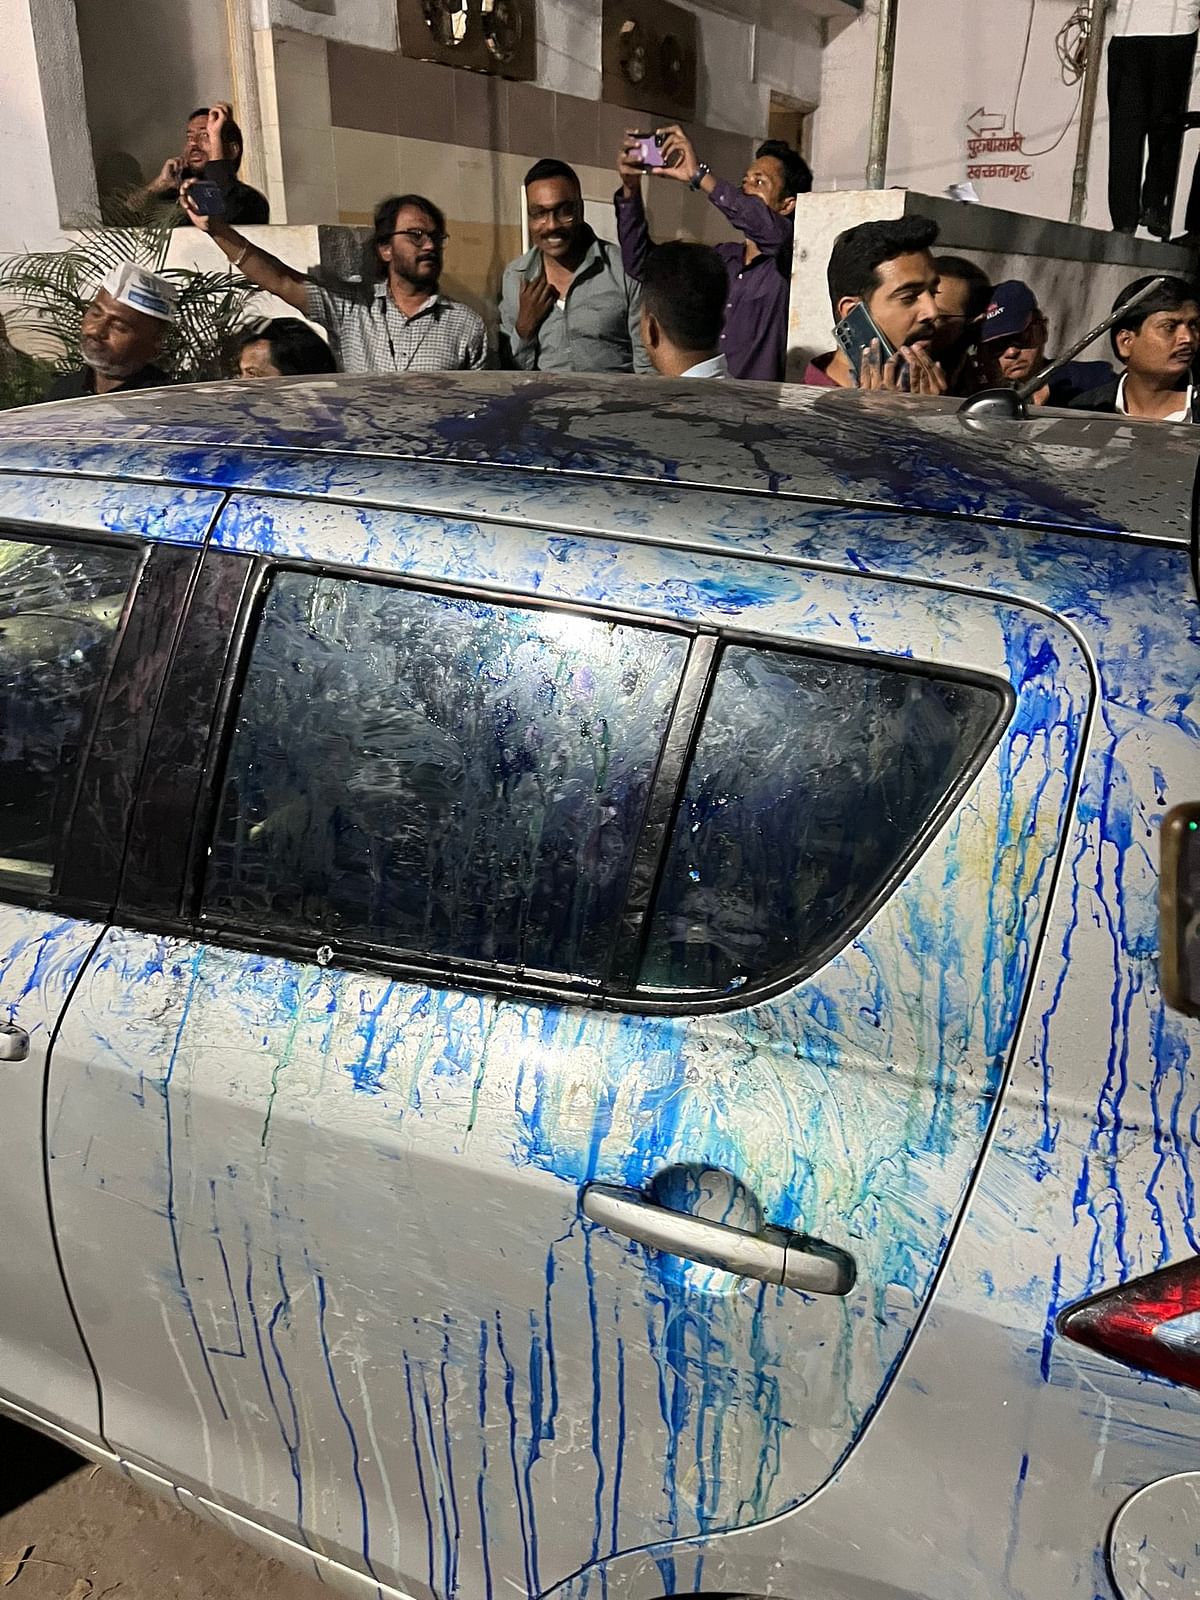 Visuals show ink being thrown, and stones and eggs being pelted on the car with Wagle and two others were in it.